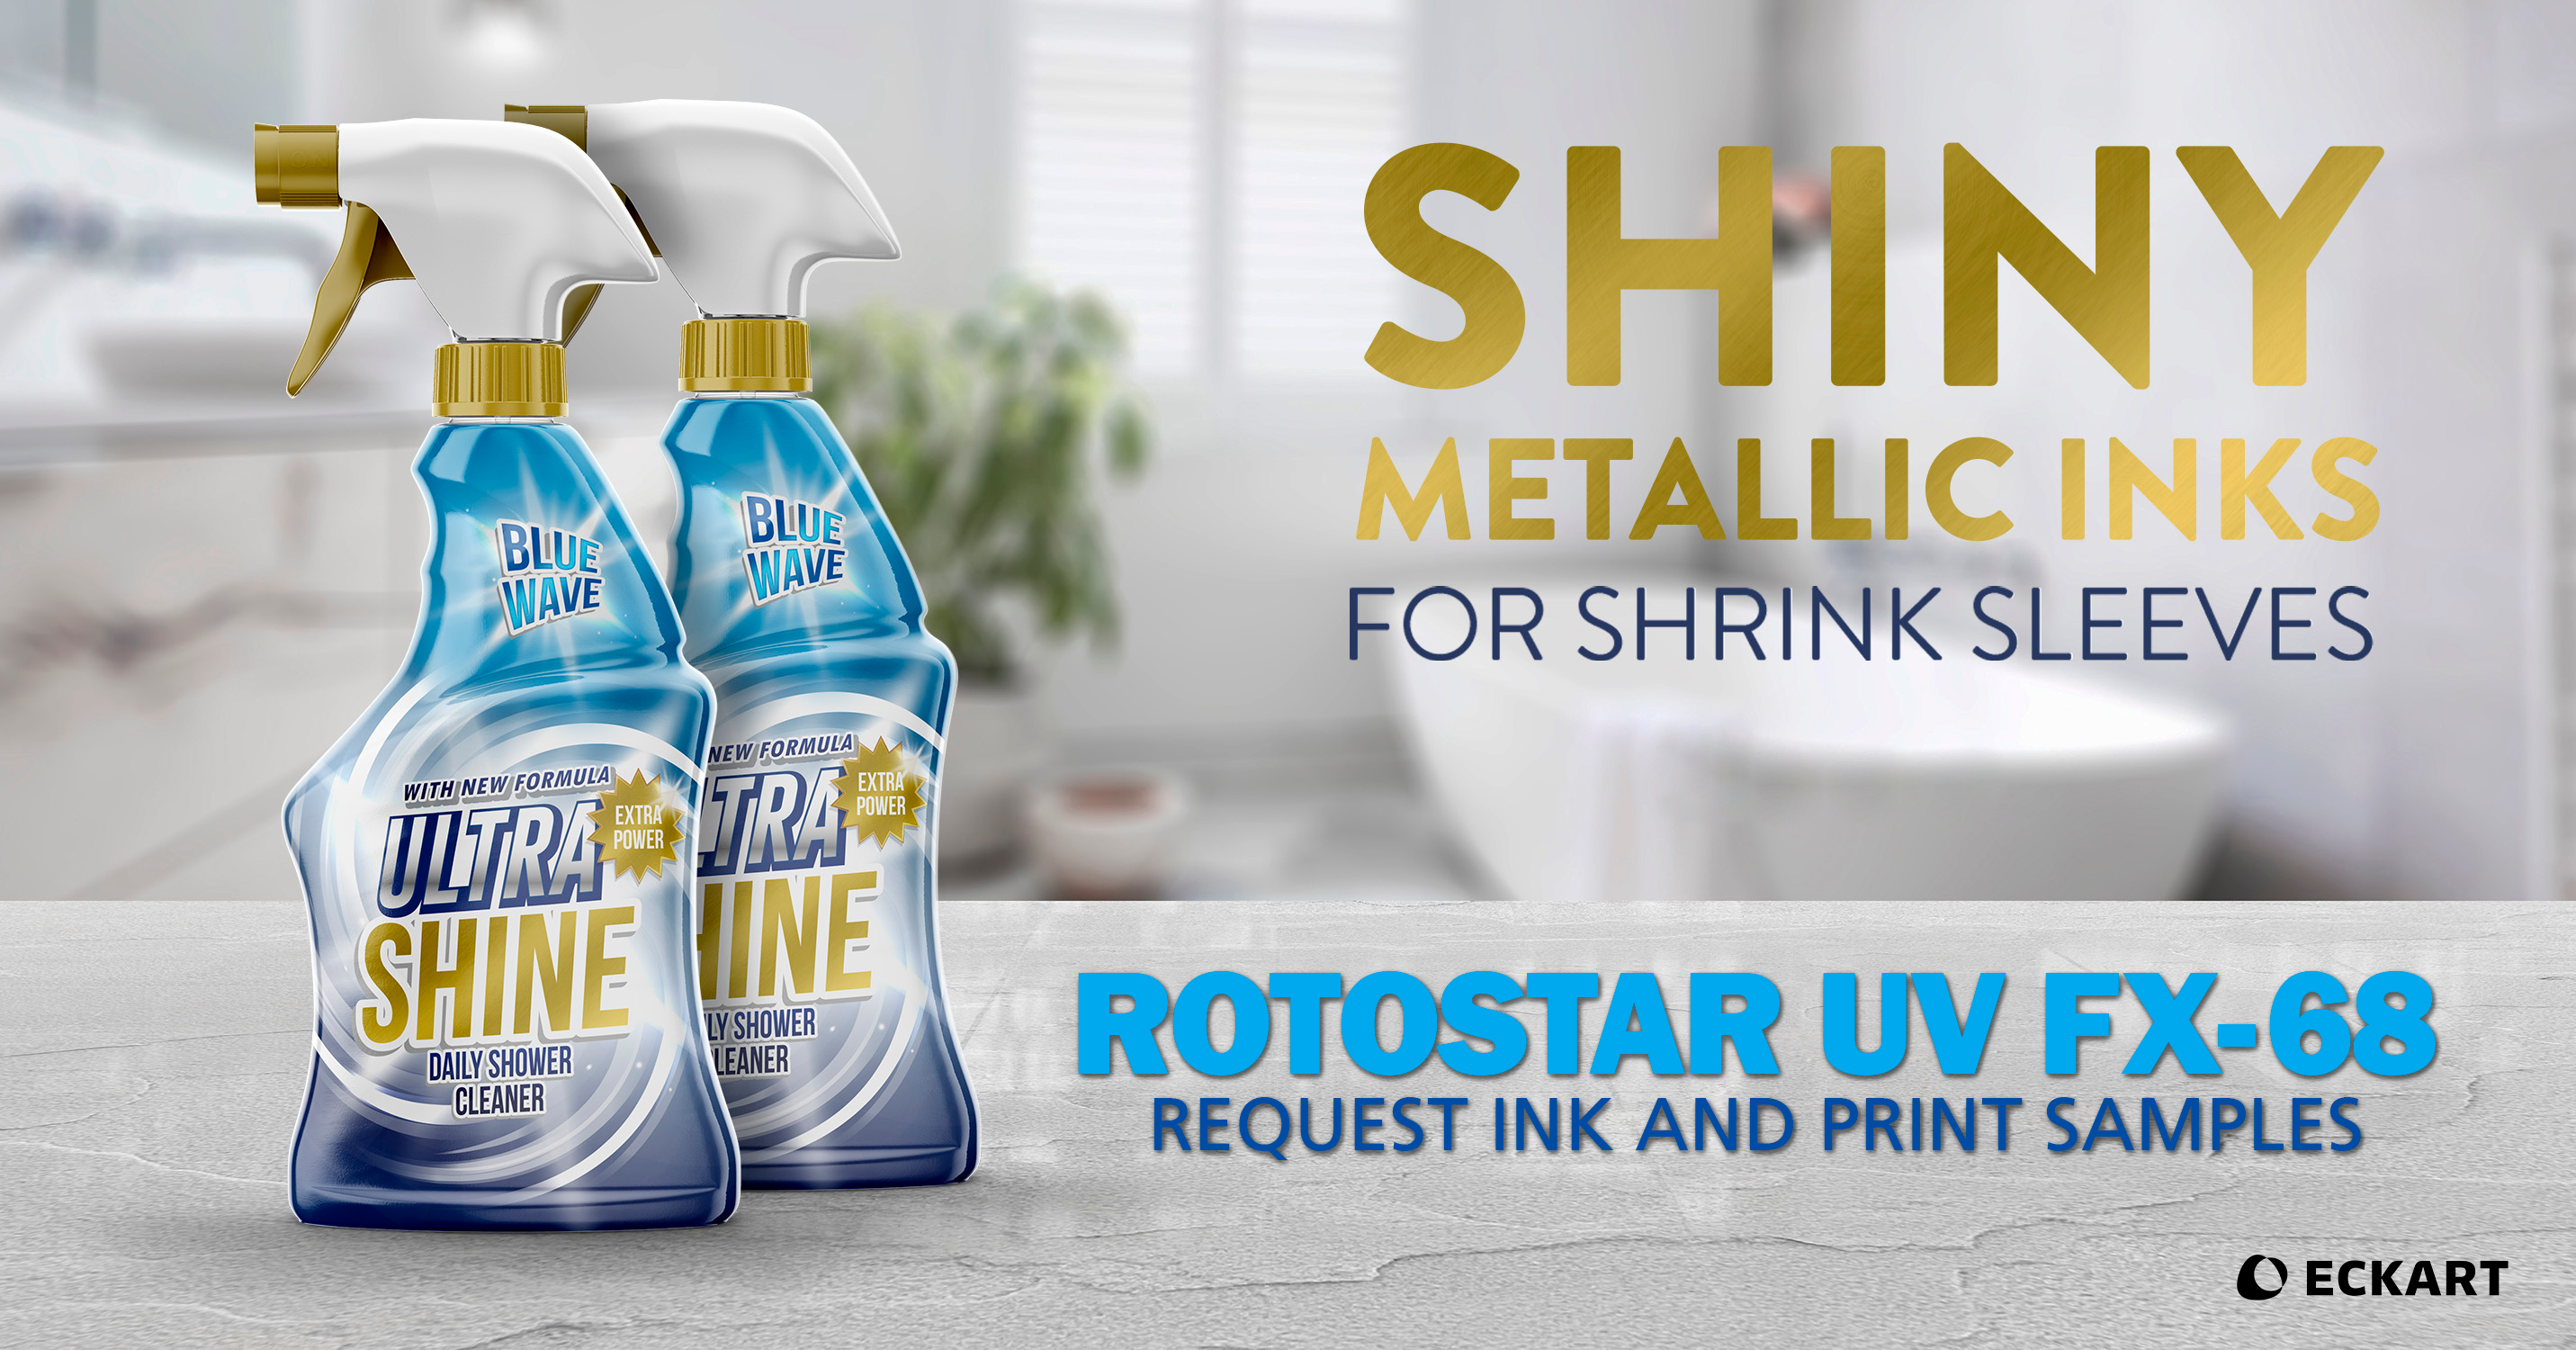 Advert for Metallic Inks with Cleaner Spray